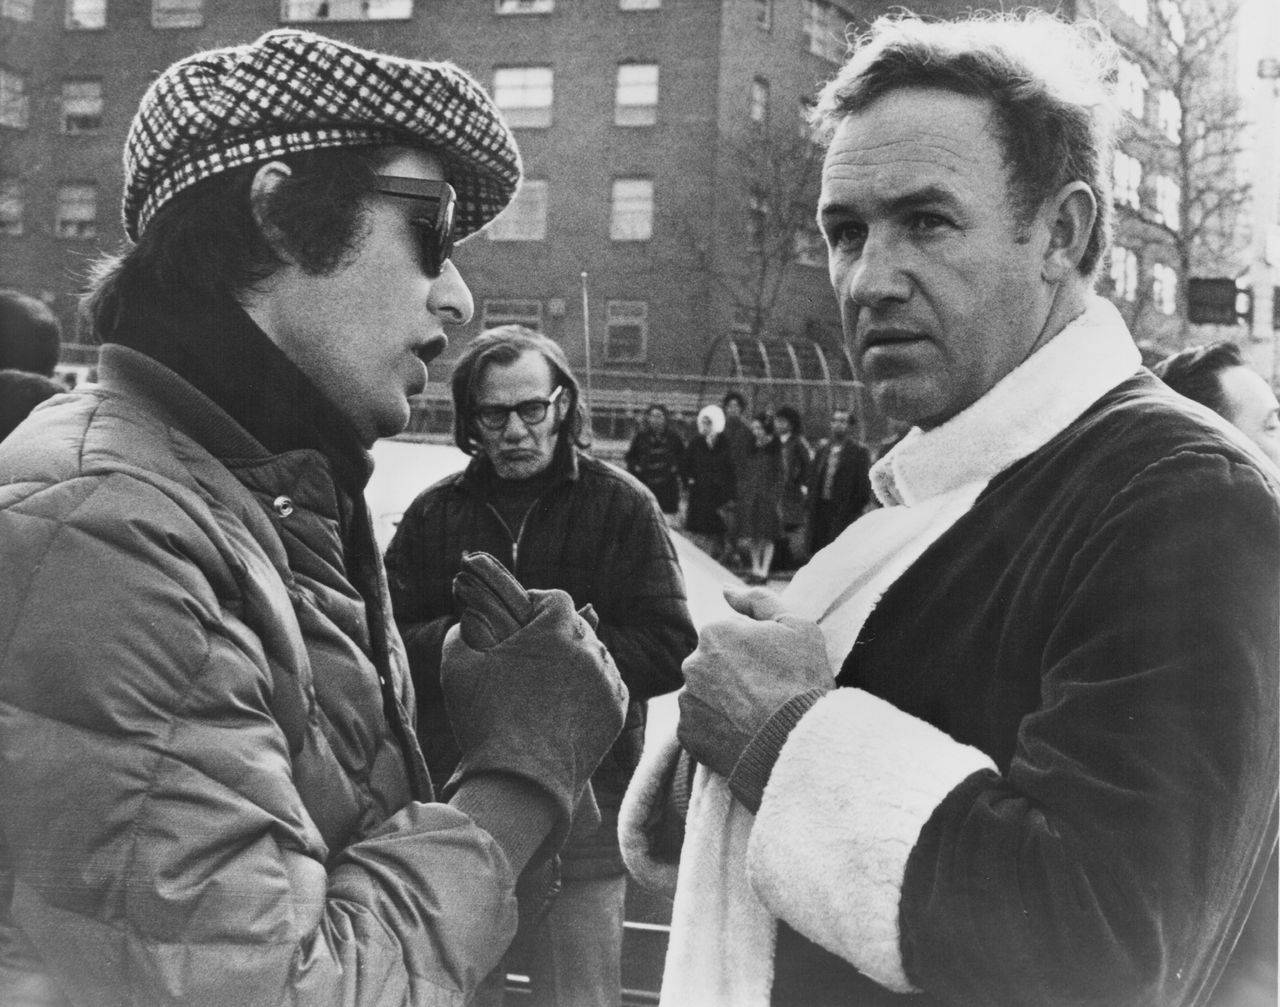 William Friedkin and Gene Hackman on the set of "The French Connection."